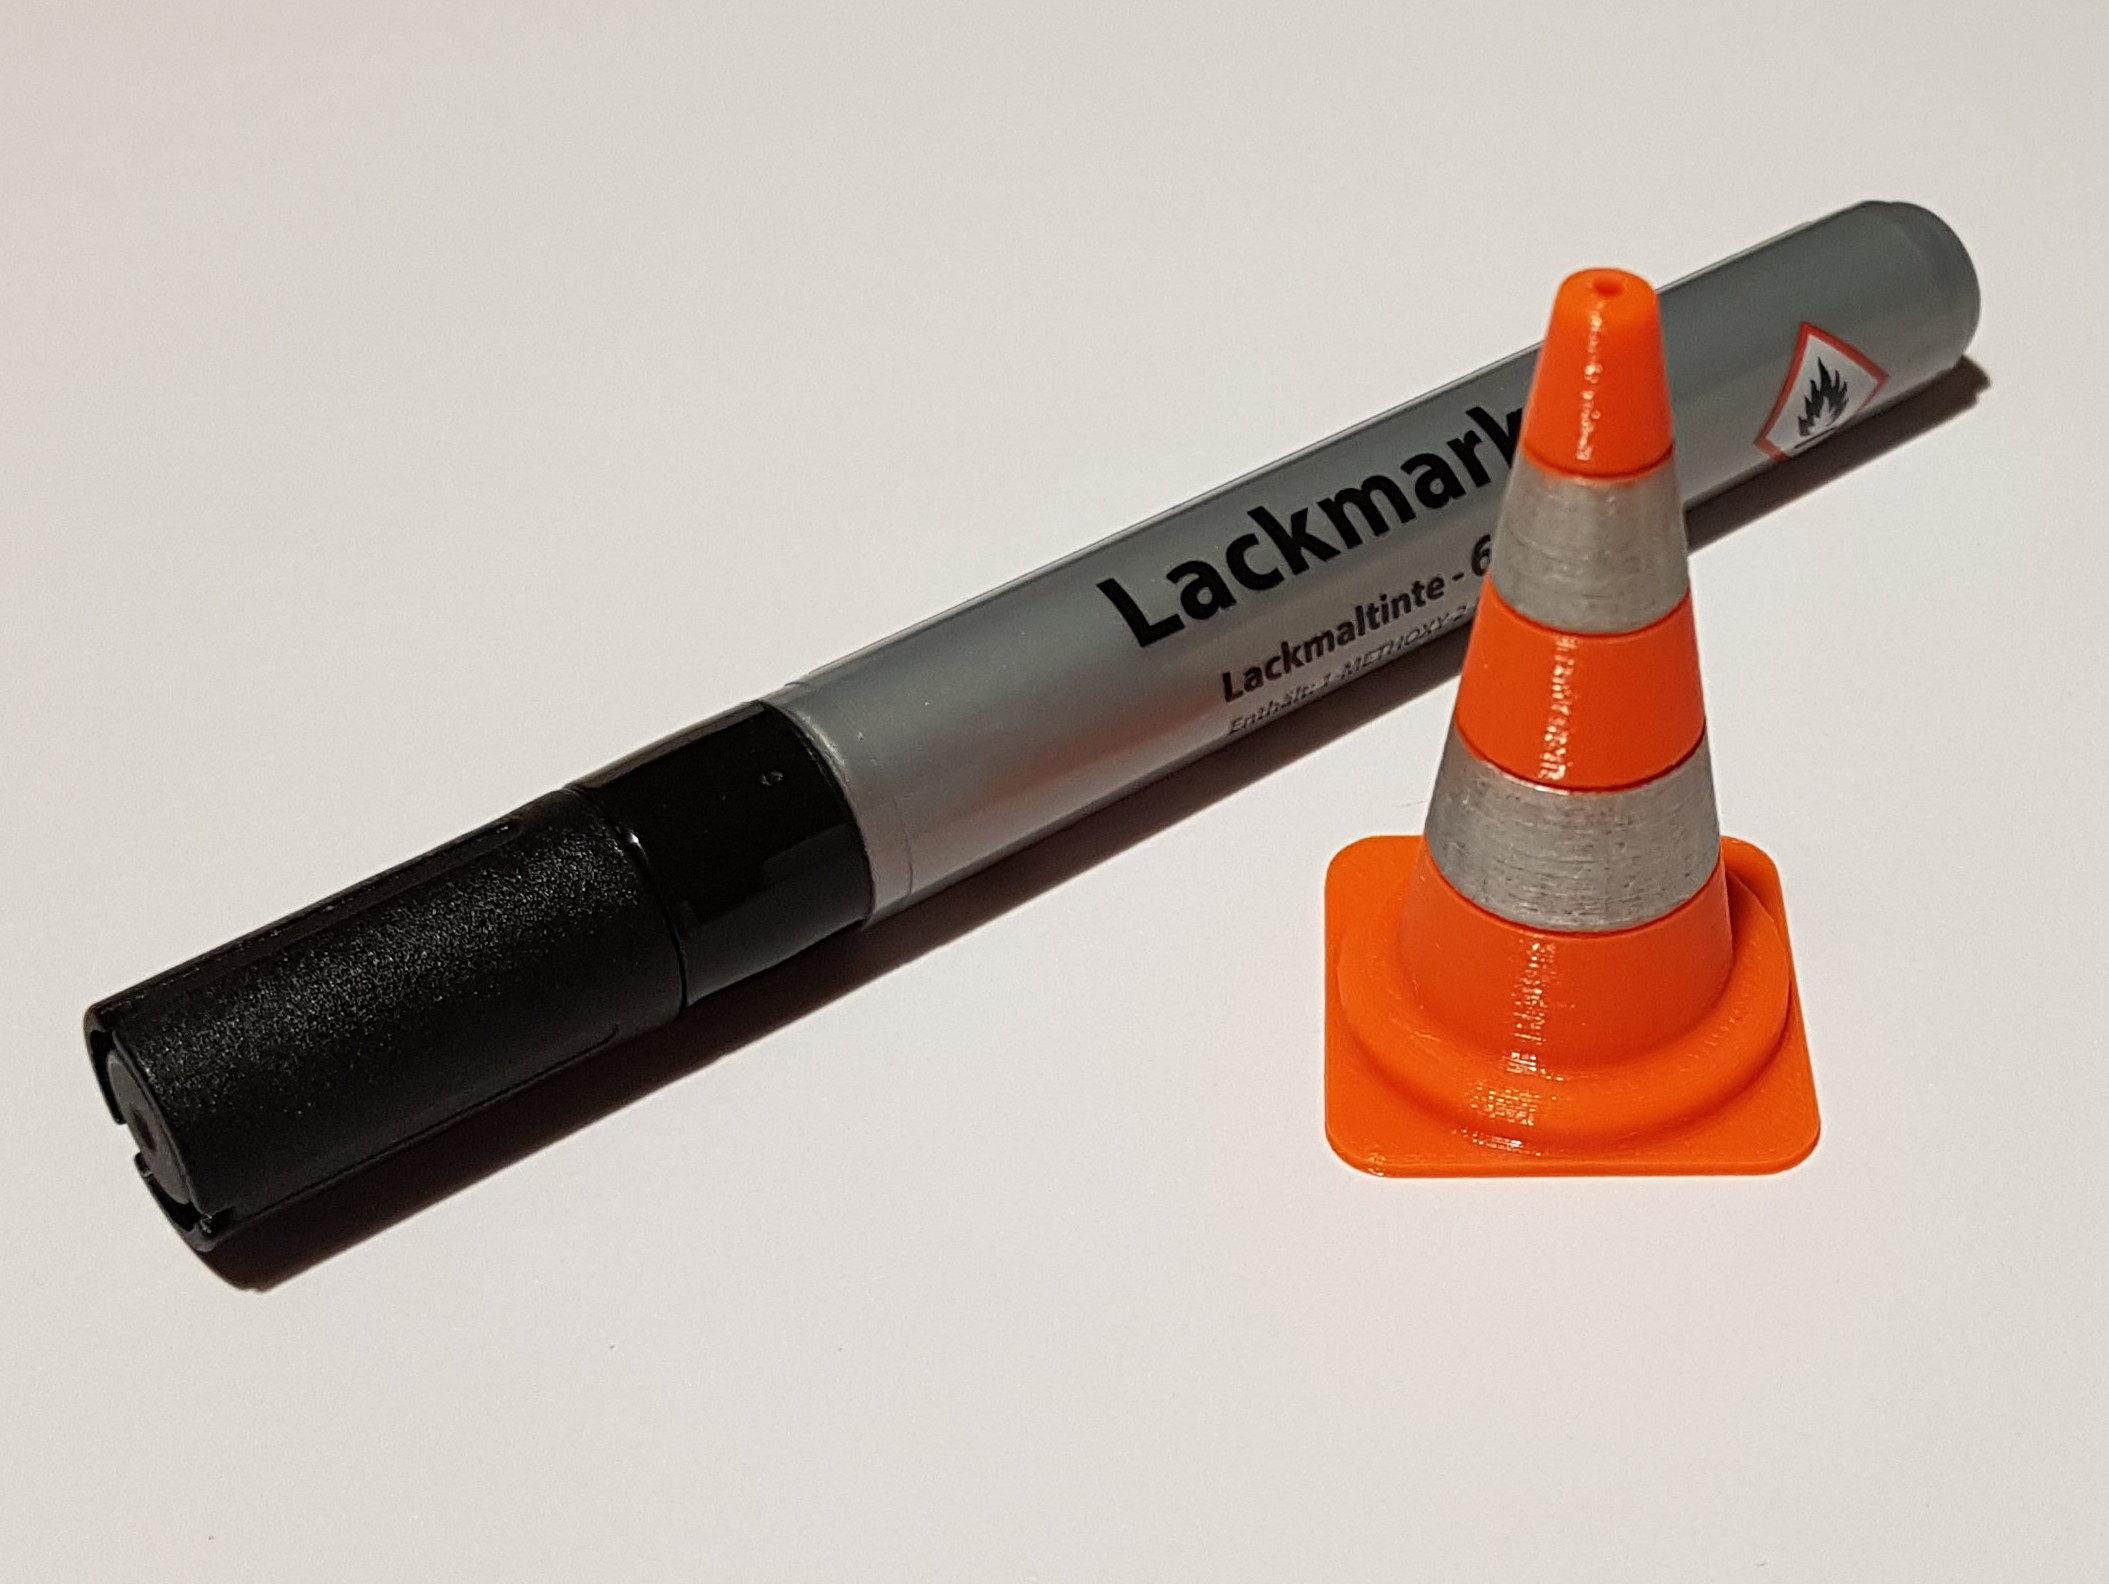 Street cone for RC models (current scale is for 1:10 models)